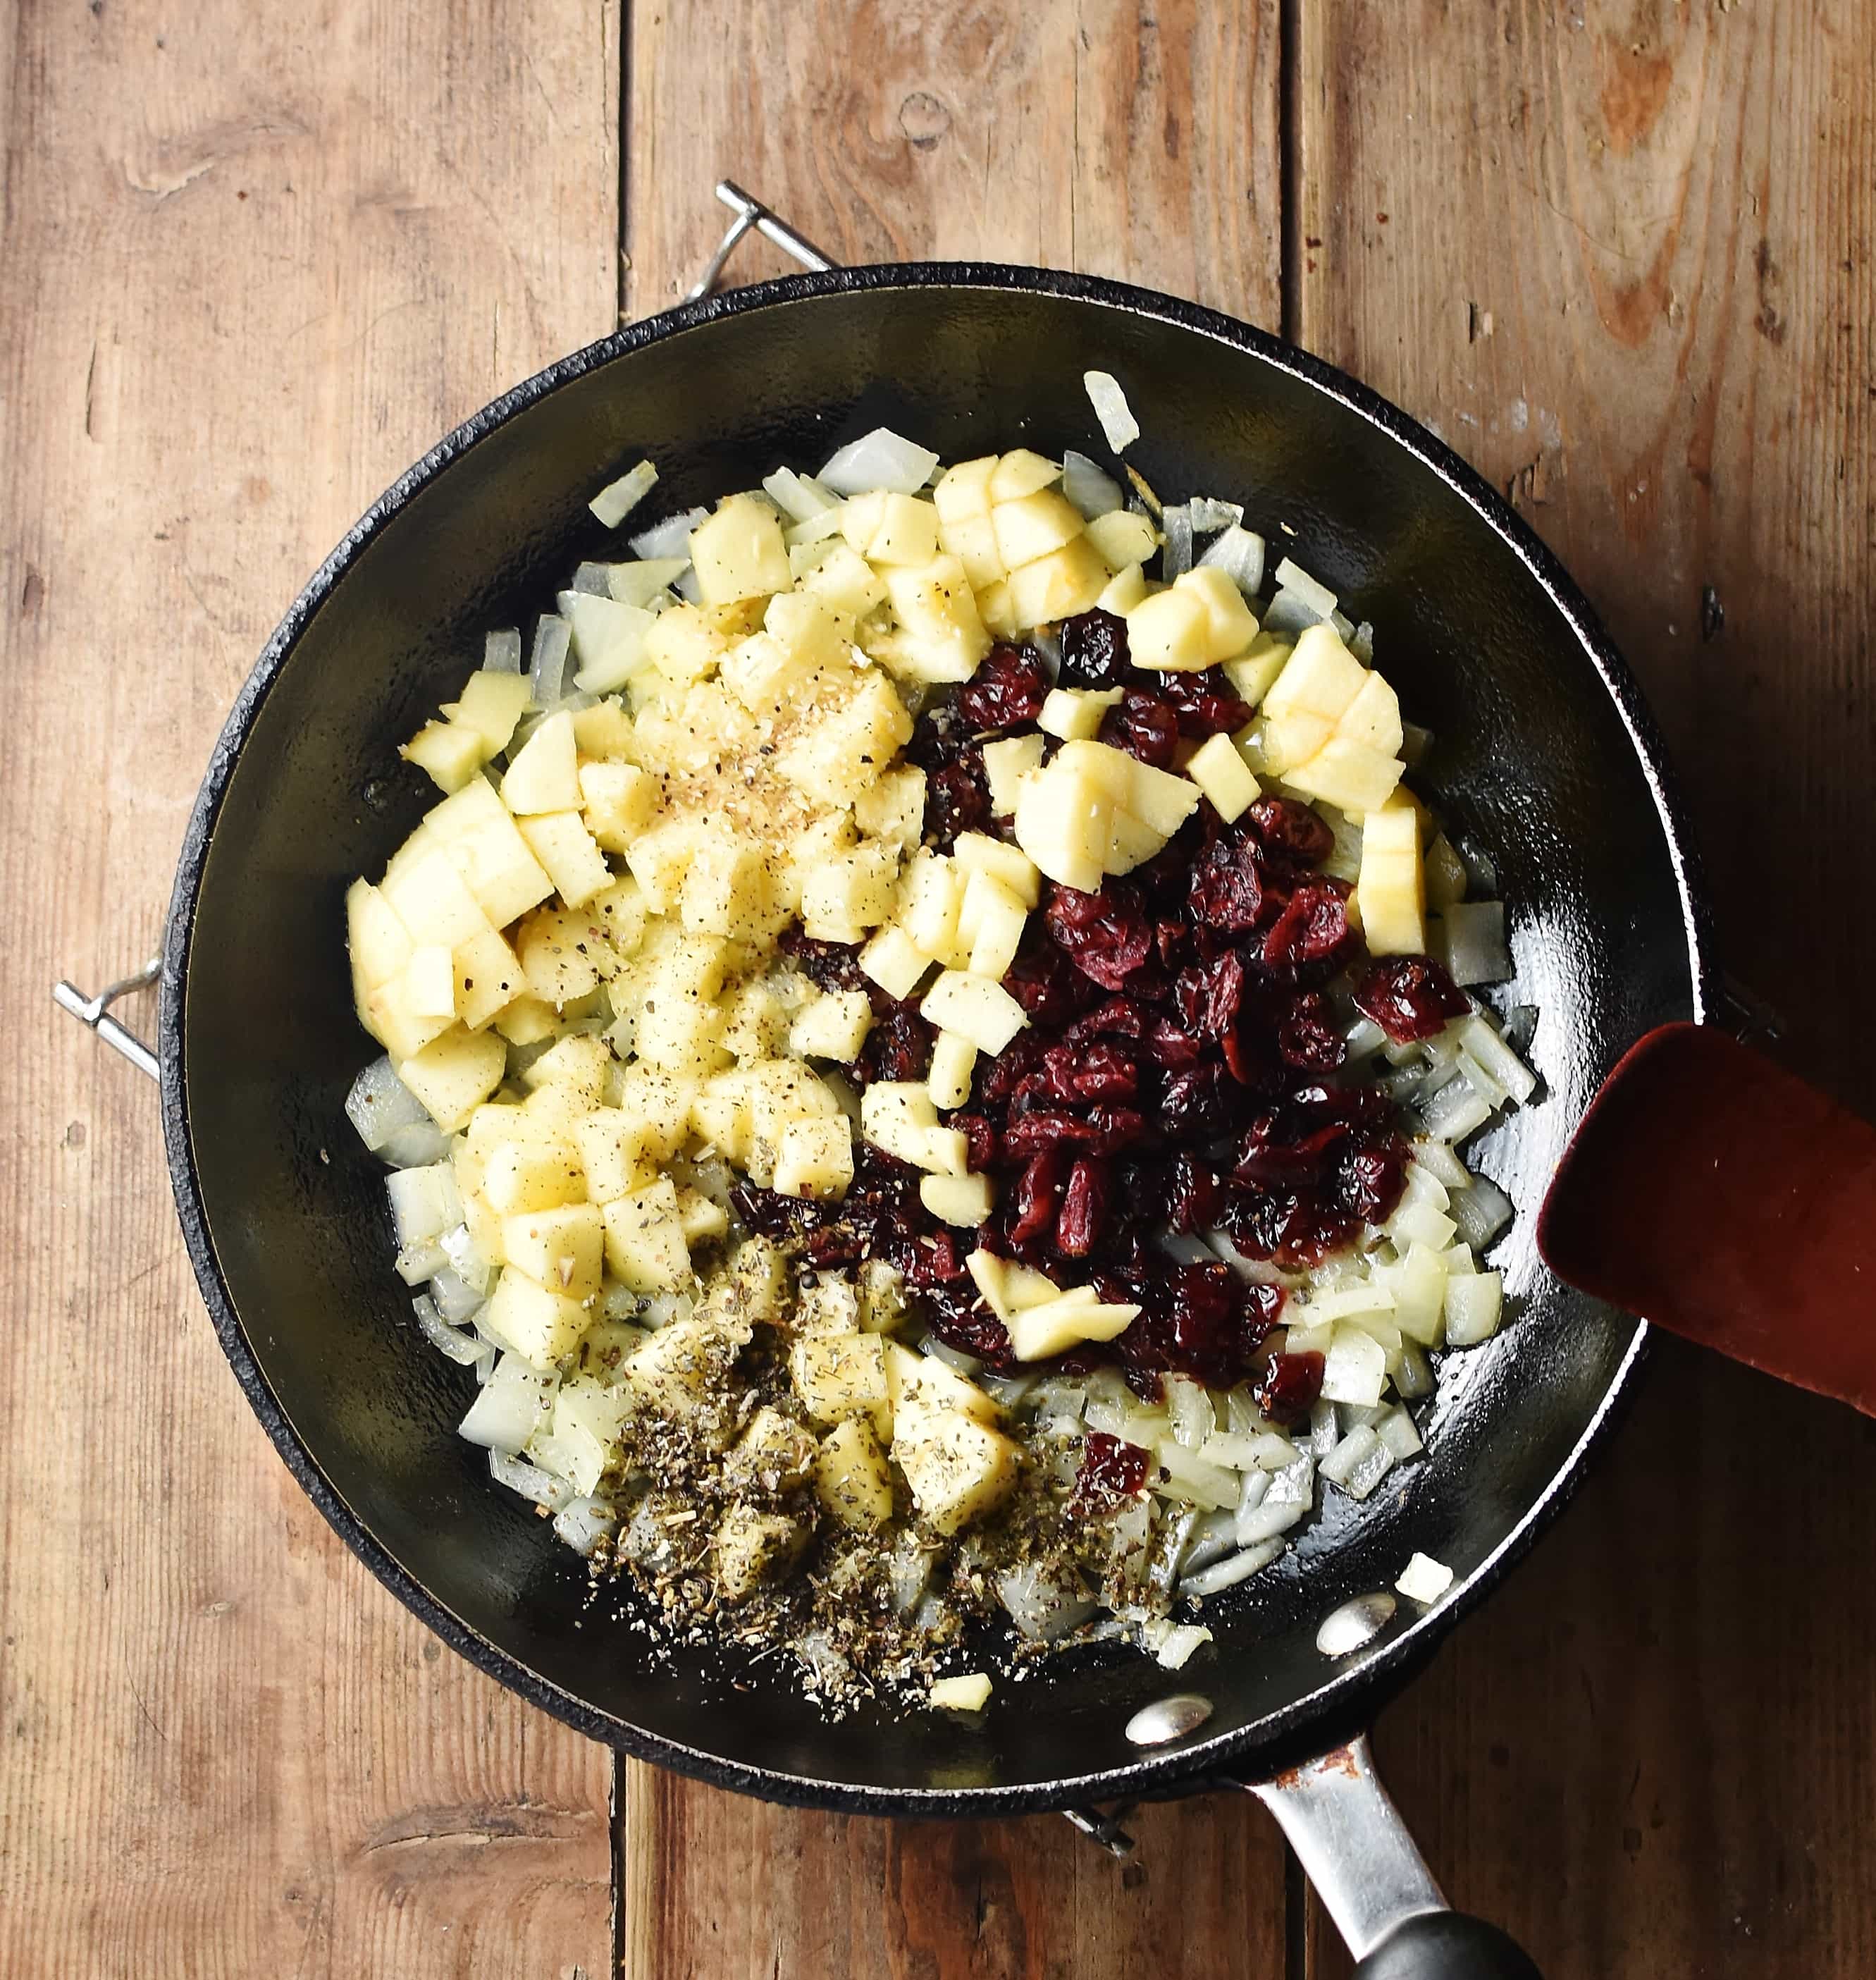 Chopped apple, cranberries, onions and spices in skillet with red spatula ti the right.